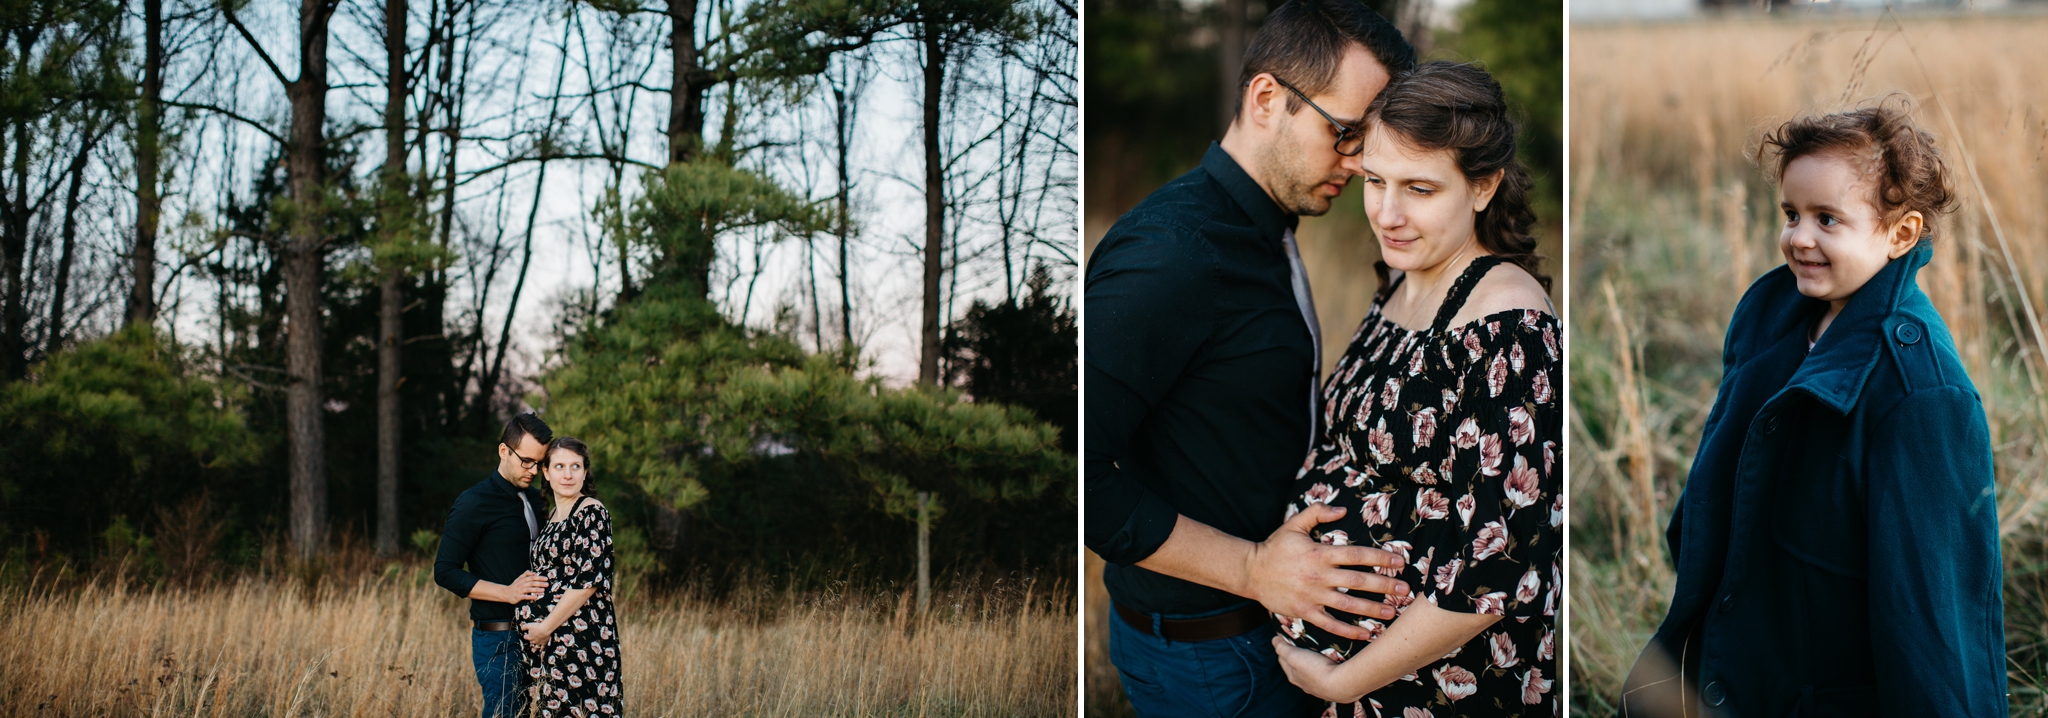 Our Maternity Session 10.jpg